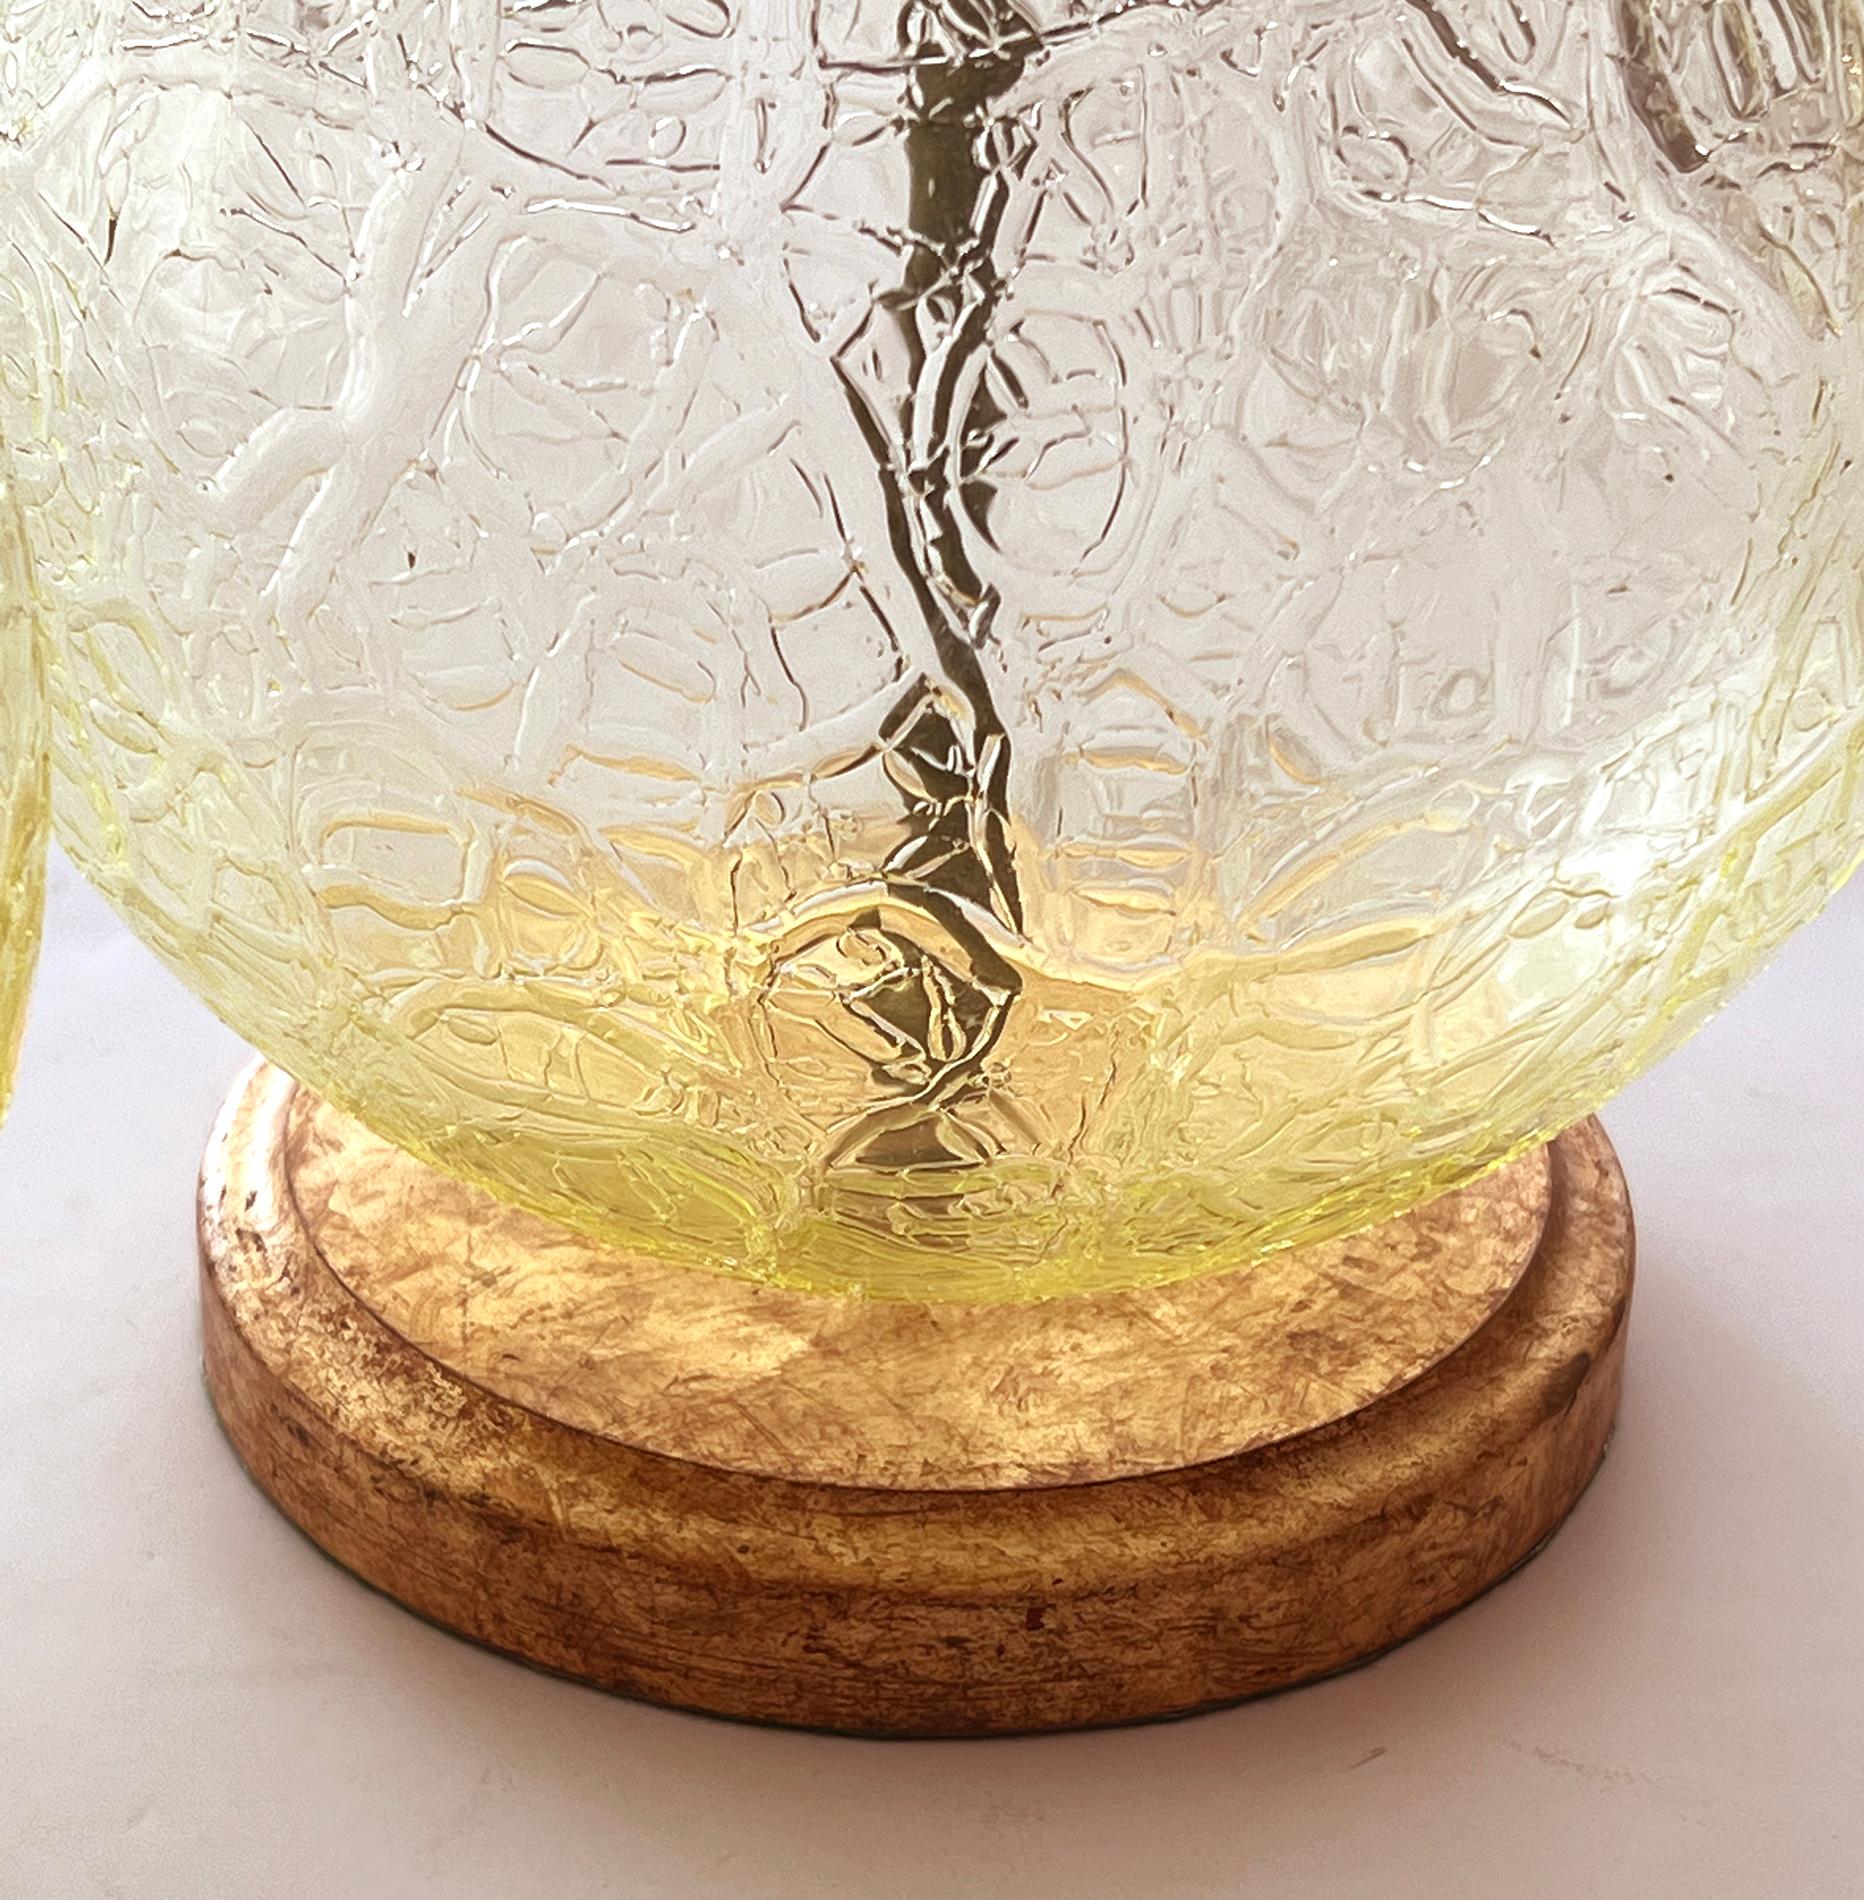 A Translucent & Textured Pair of Murano Stacked Chartreuse Glass Sphere Lamps  In Good Condition For Sale In San Francisco, CA